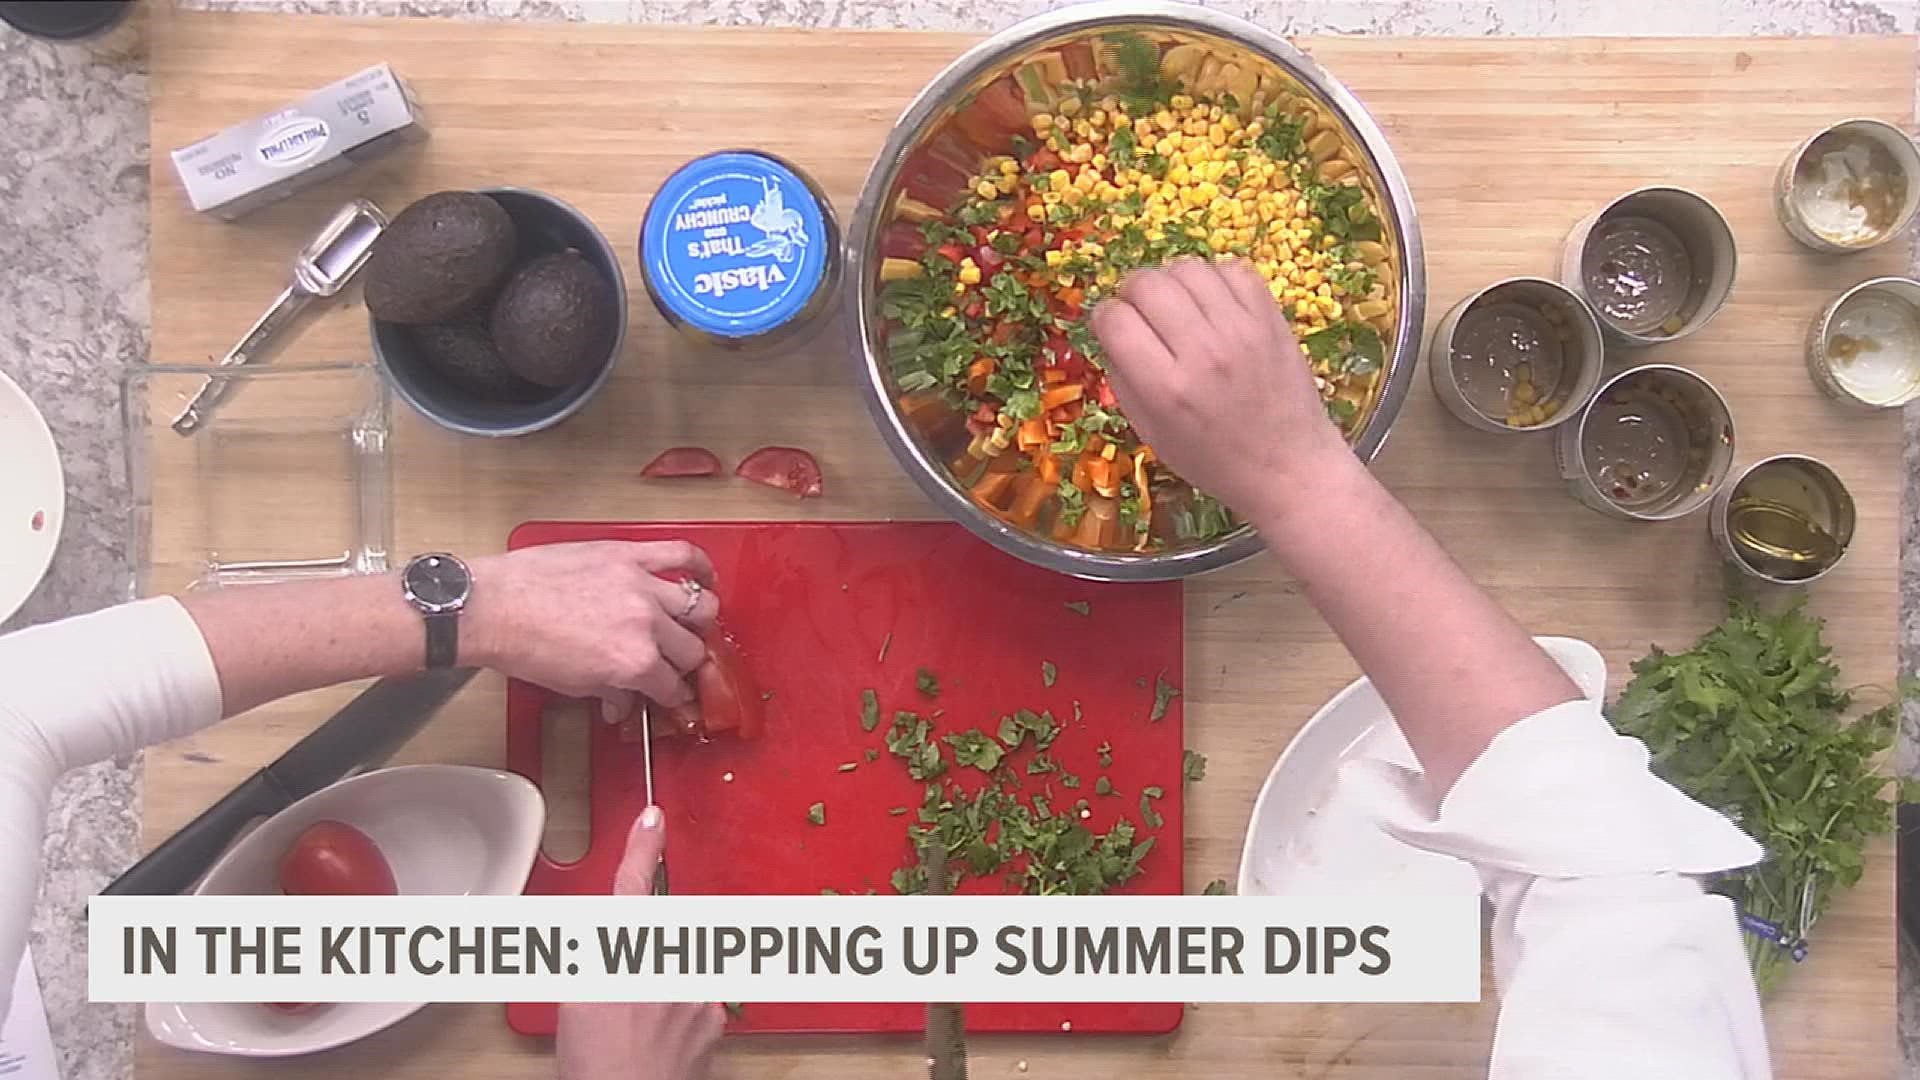 Cowboy caviar, corn and pickle dips you can enjoy while you take a dip in the pool this summer!